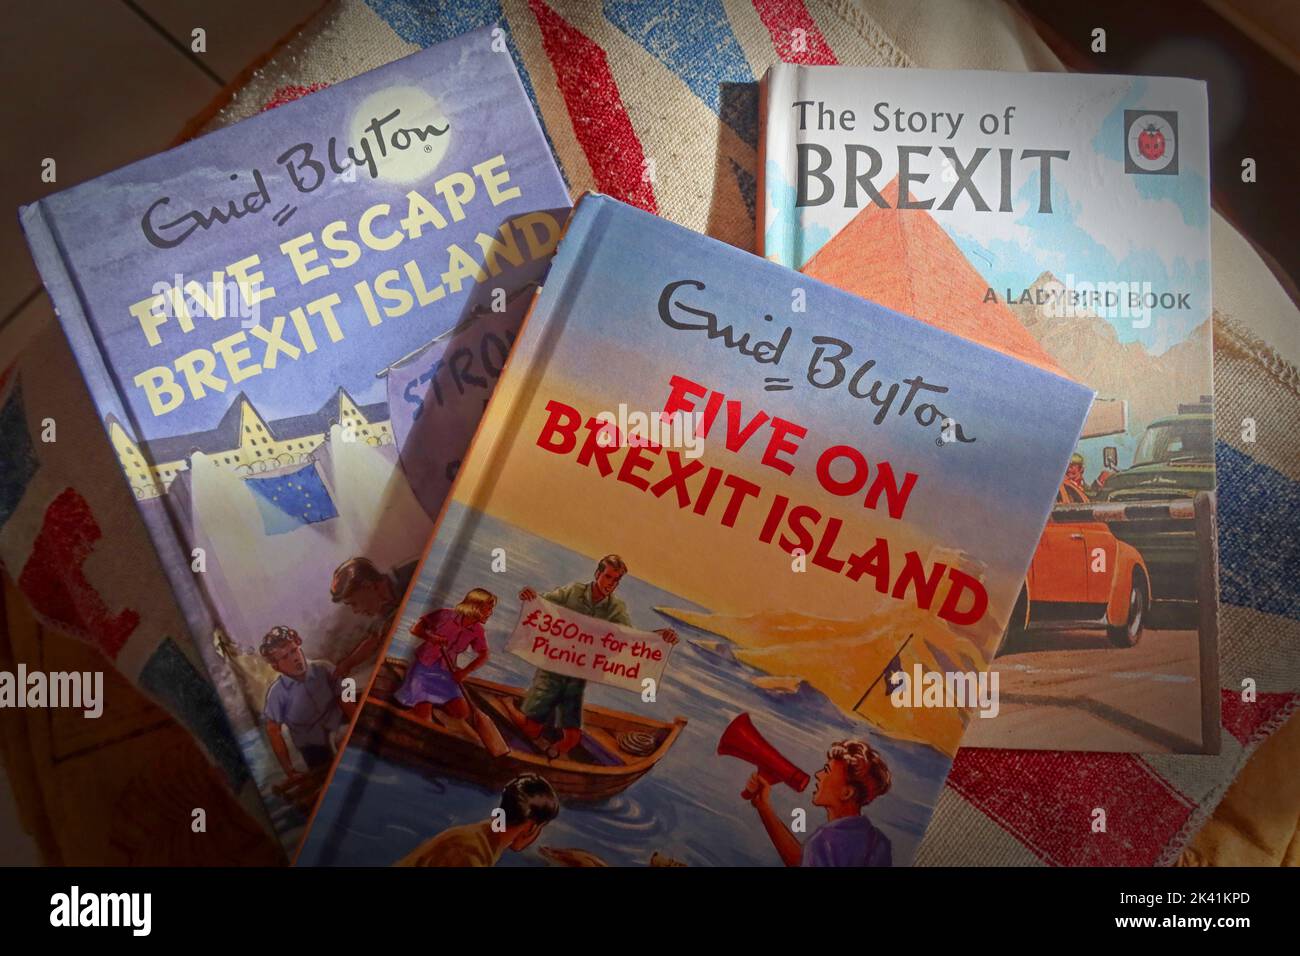 Bexit books, Five Escape Brexit Island, The Story of Brexit, ladybird book Stock Photo